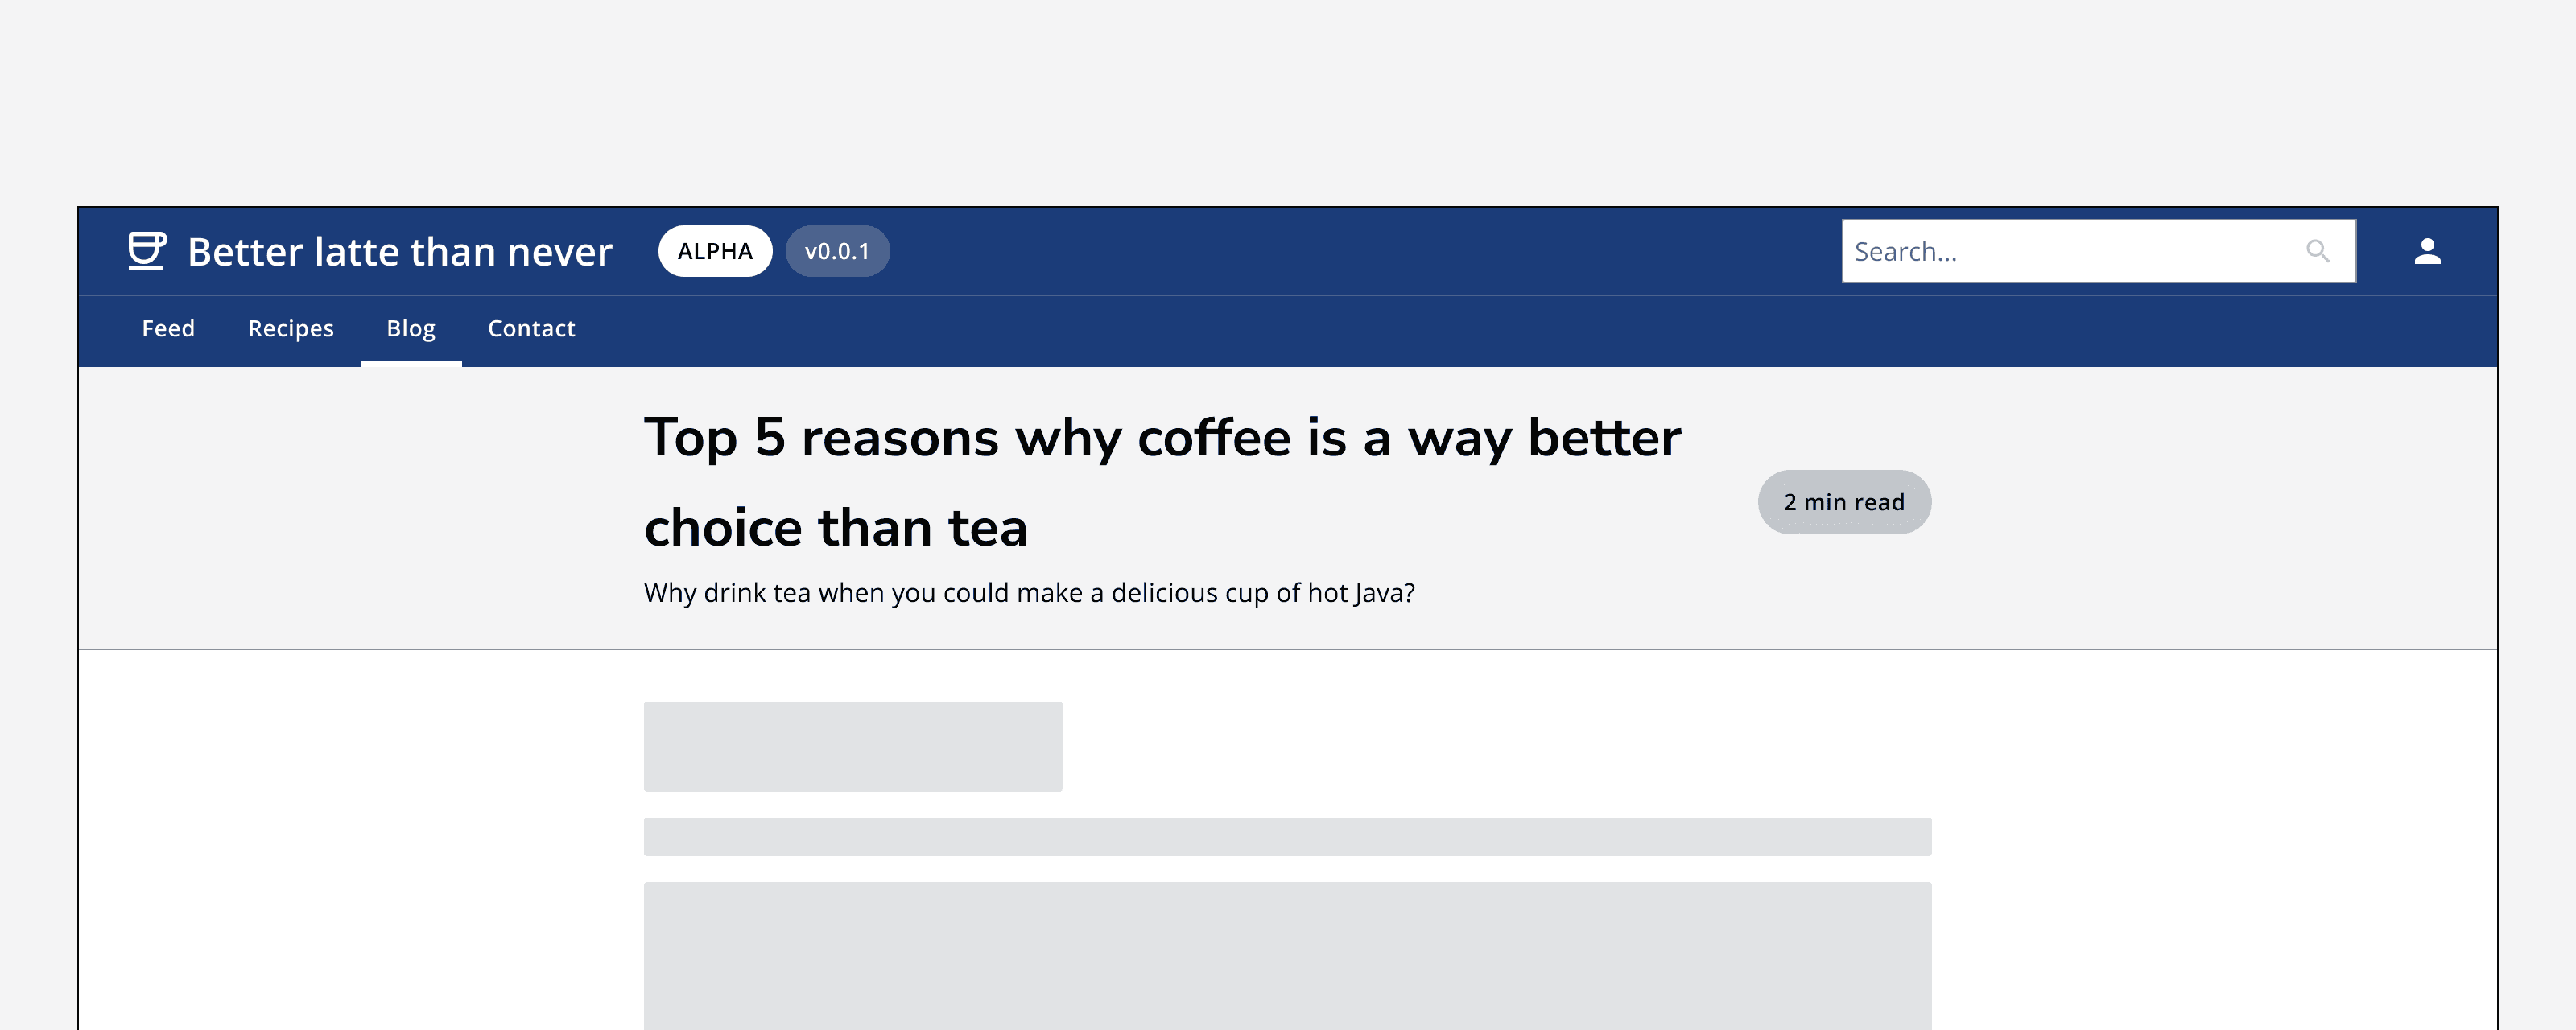 An example app titled ‘Better latte than never’ showing a page called ‘Top 5 reasons why coffee is better than tea’ with a page header that spans the full width of the content area.